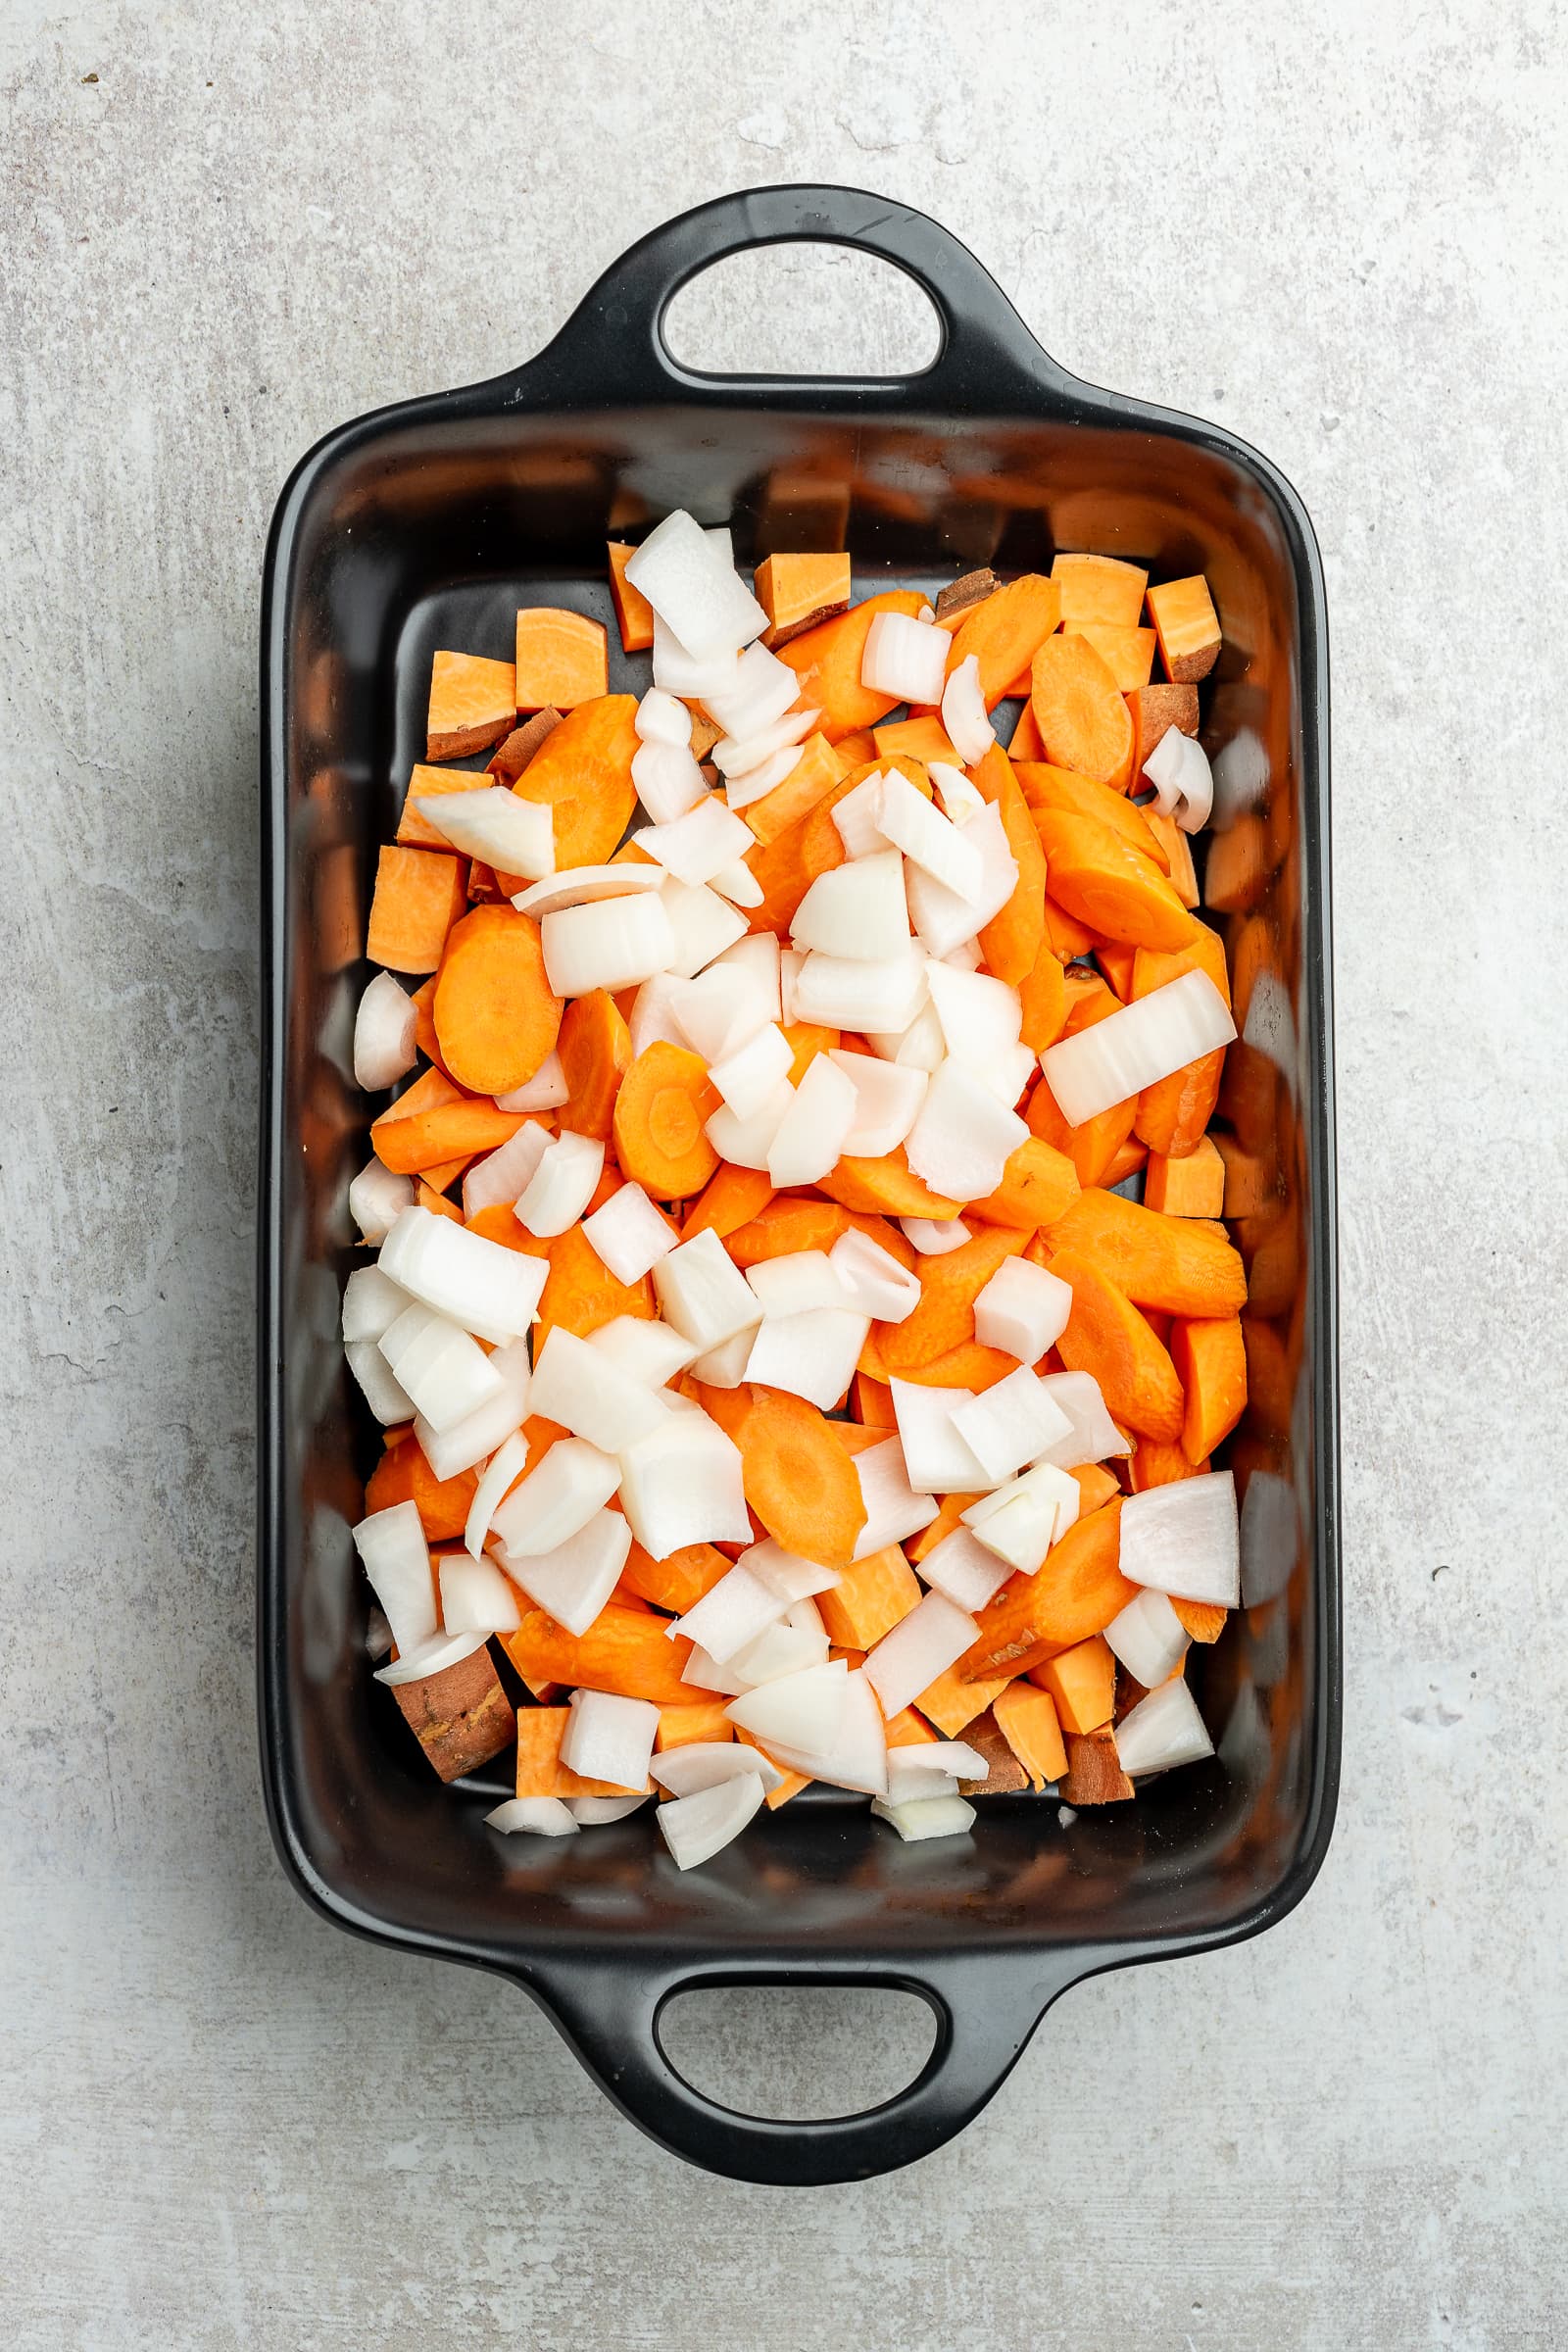 Chopped potatoes, carrots, and onions in a large baking dish.